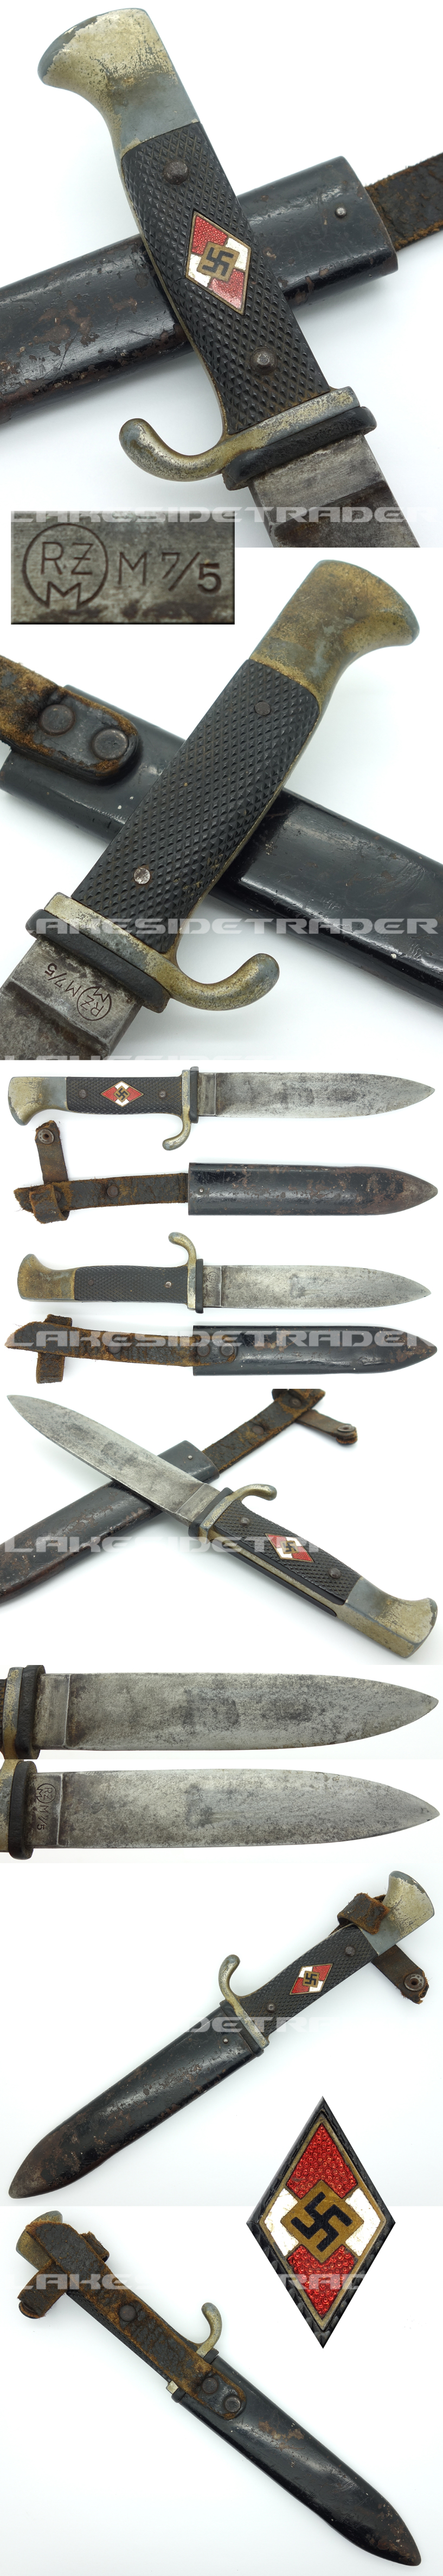 Hitler Youth Knife by RZM M7/5